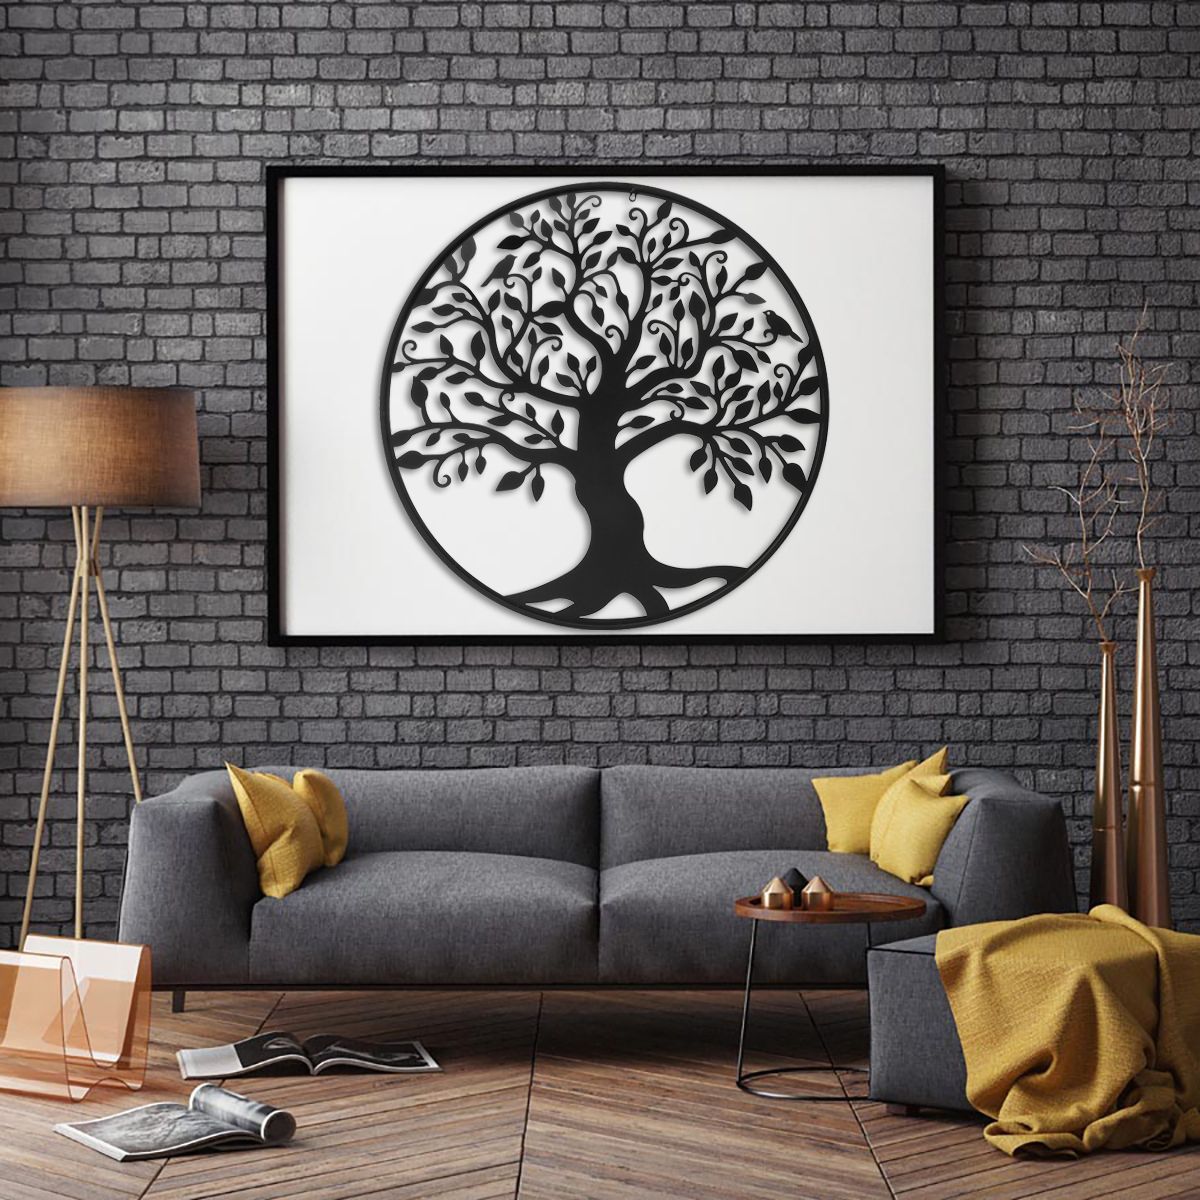 39in-Black-Tree-of-Life-Metal-Hanging-Wall-Art-Round-Sculpture-Home-Garden-Decoration-1761926